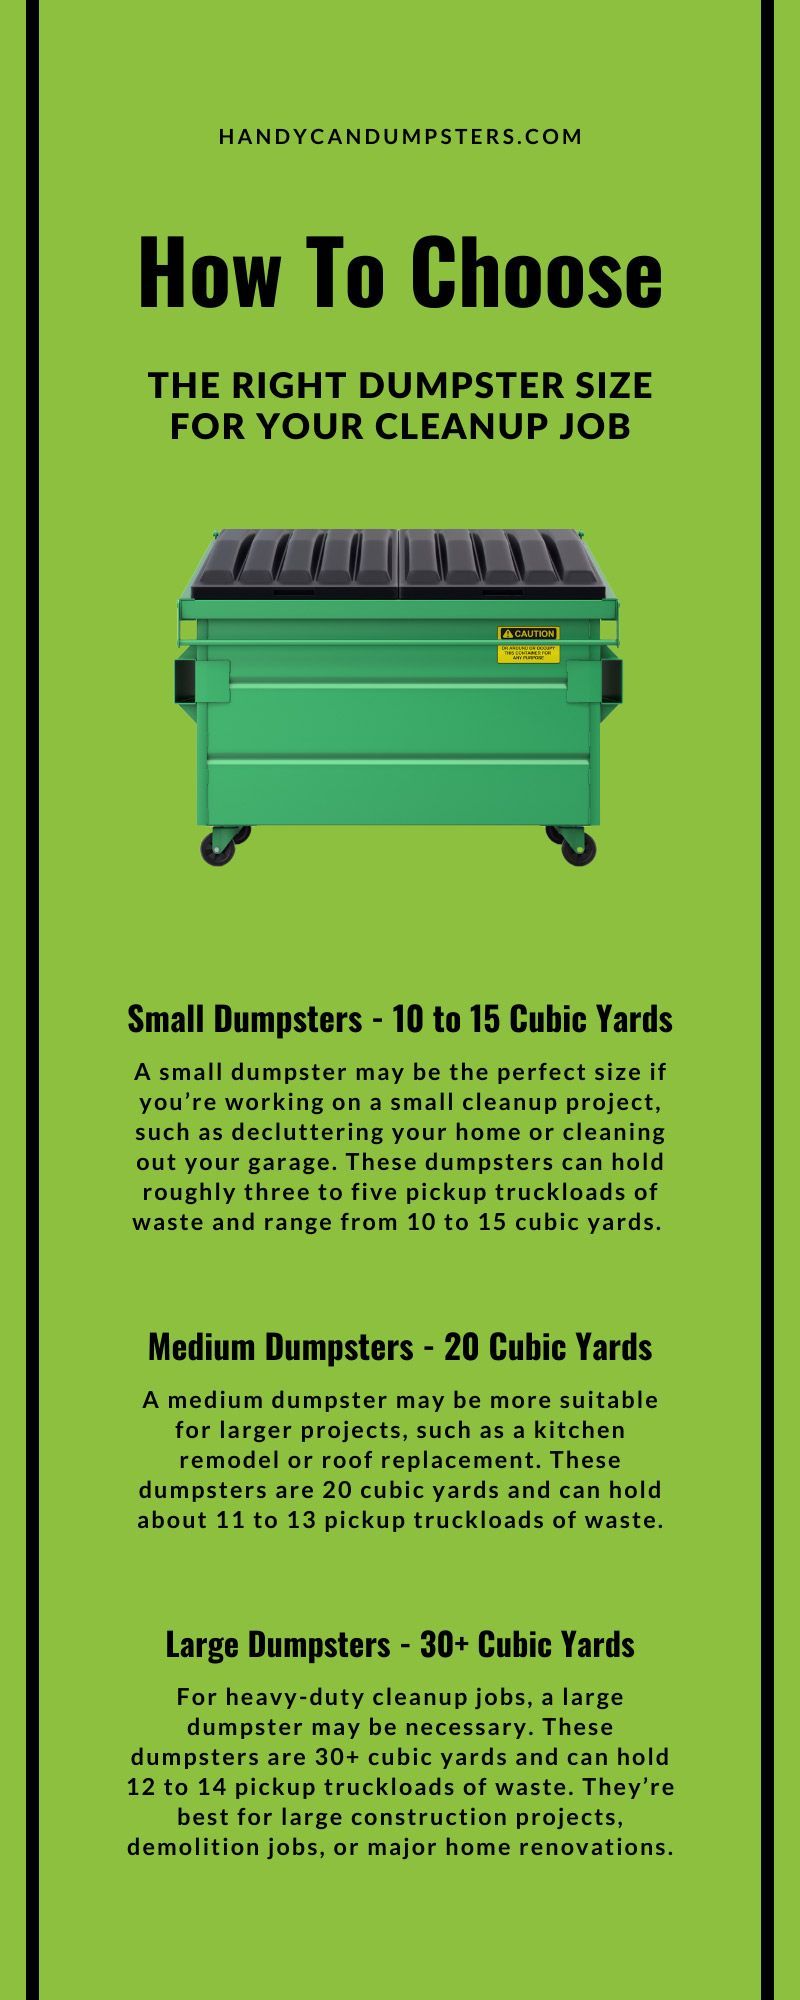 How To Choose the Right Dumpster Size for Your Cleanup Job